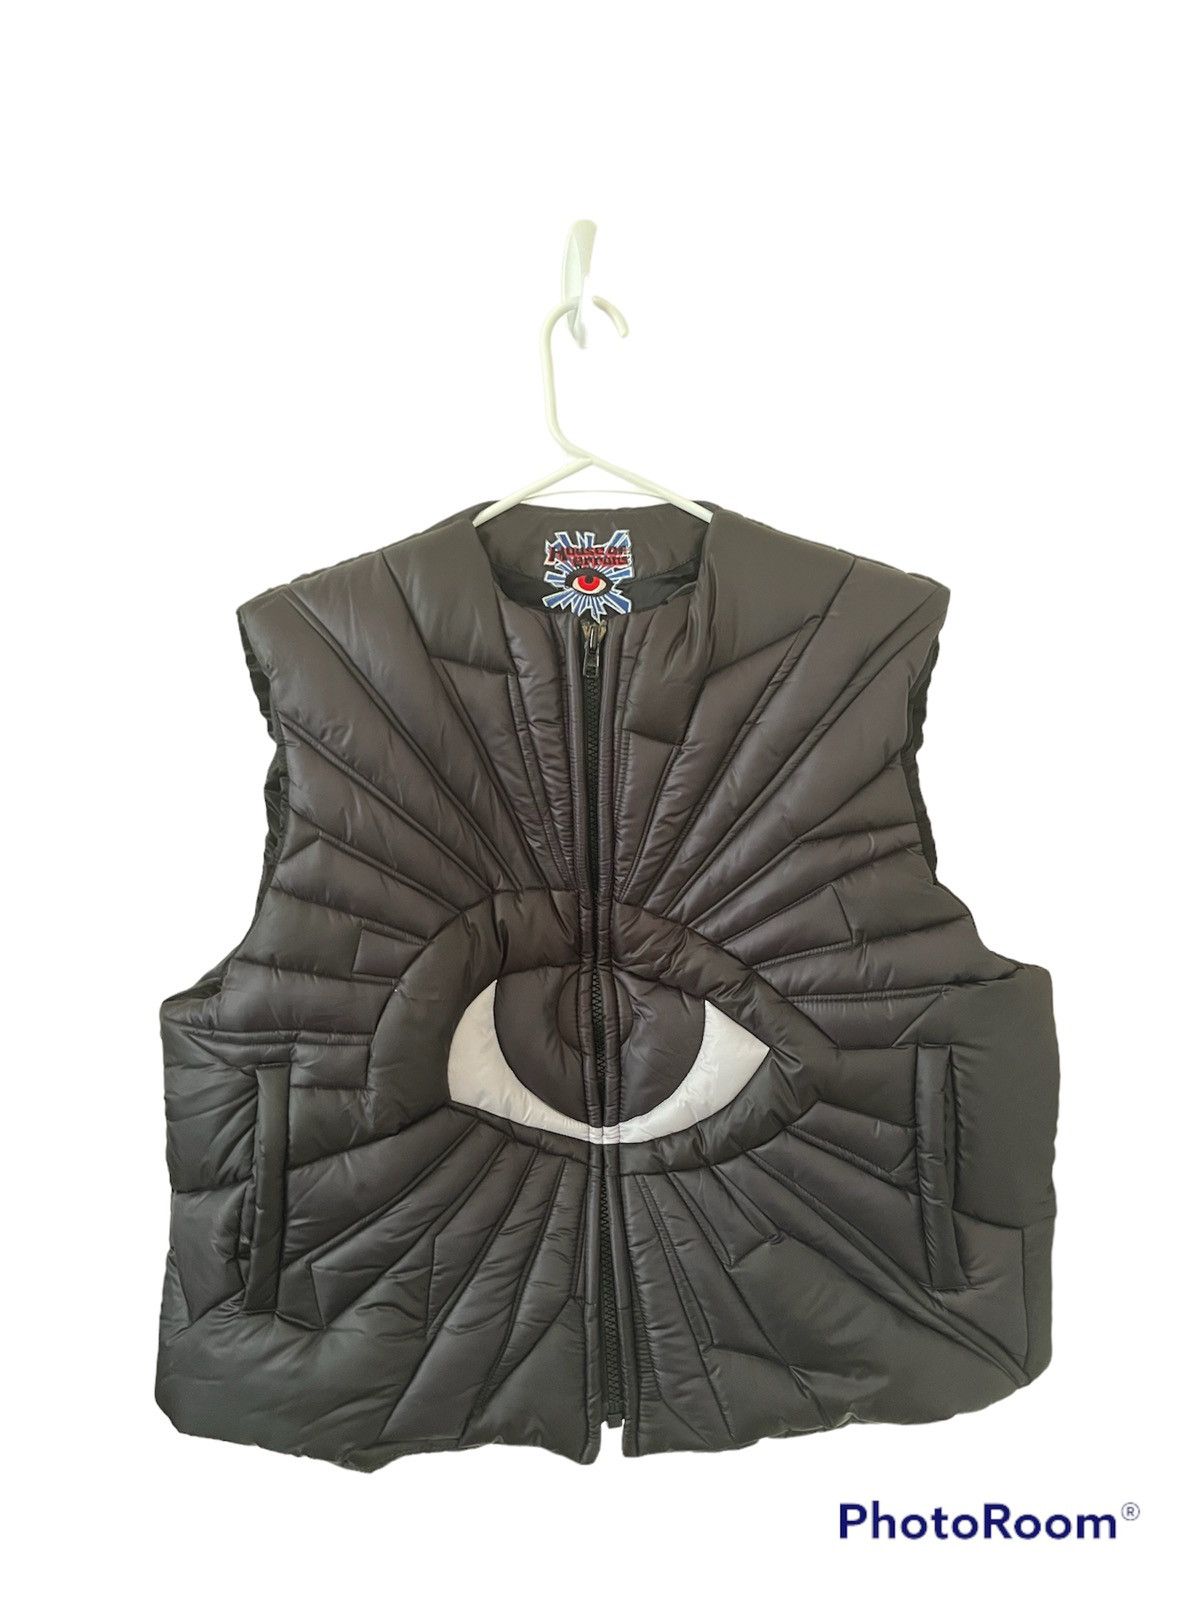 House of Errors House of Errors All Seeing Puffer Vest | Grailed